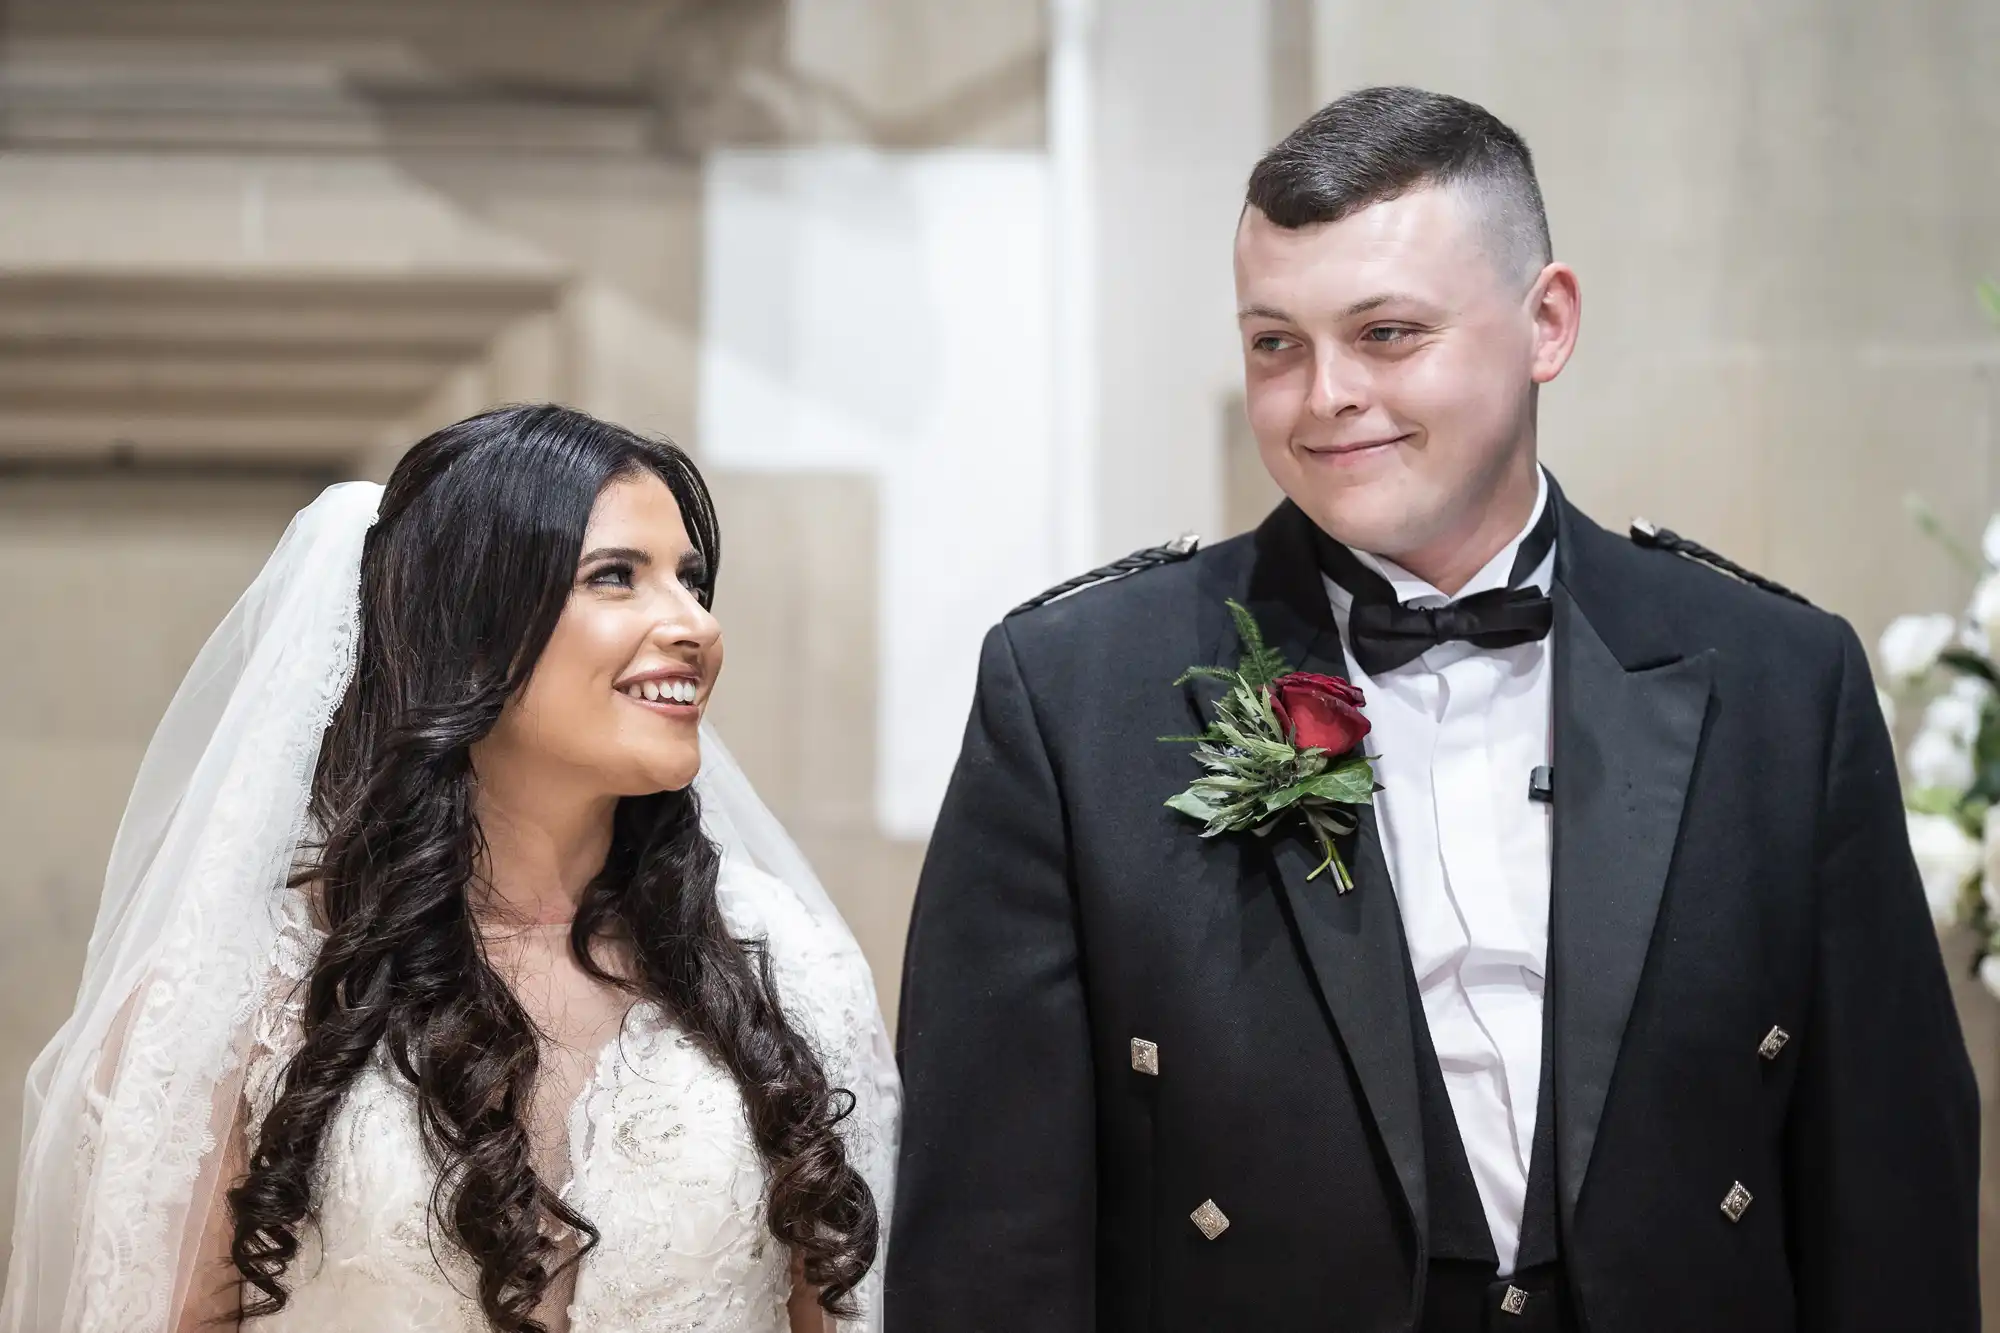 A joyful bride in a white lace gown and veil smiles at someone off-camera, while a groom in a black military uniform with a boutonniere looks at her fondly.